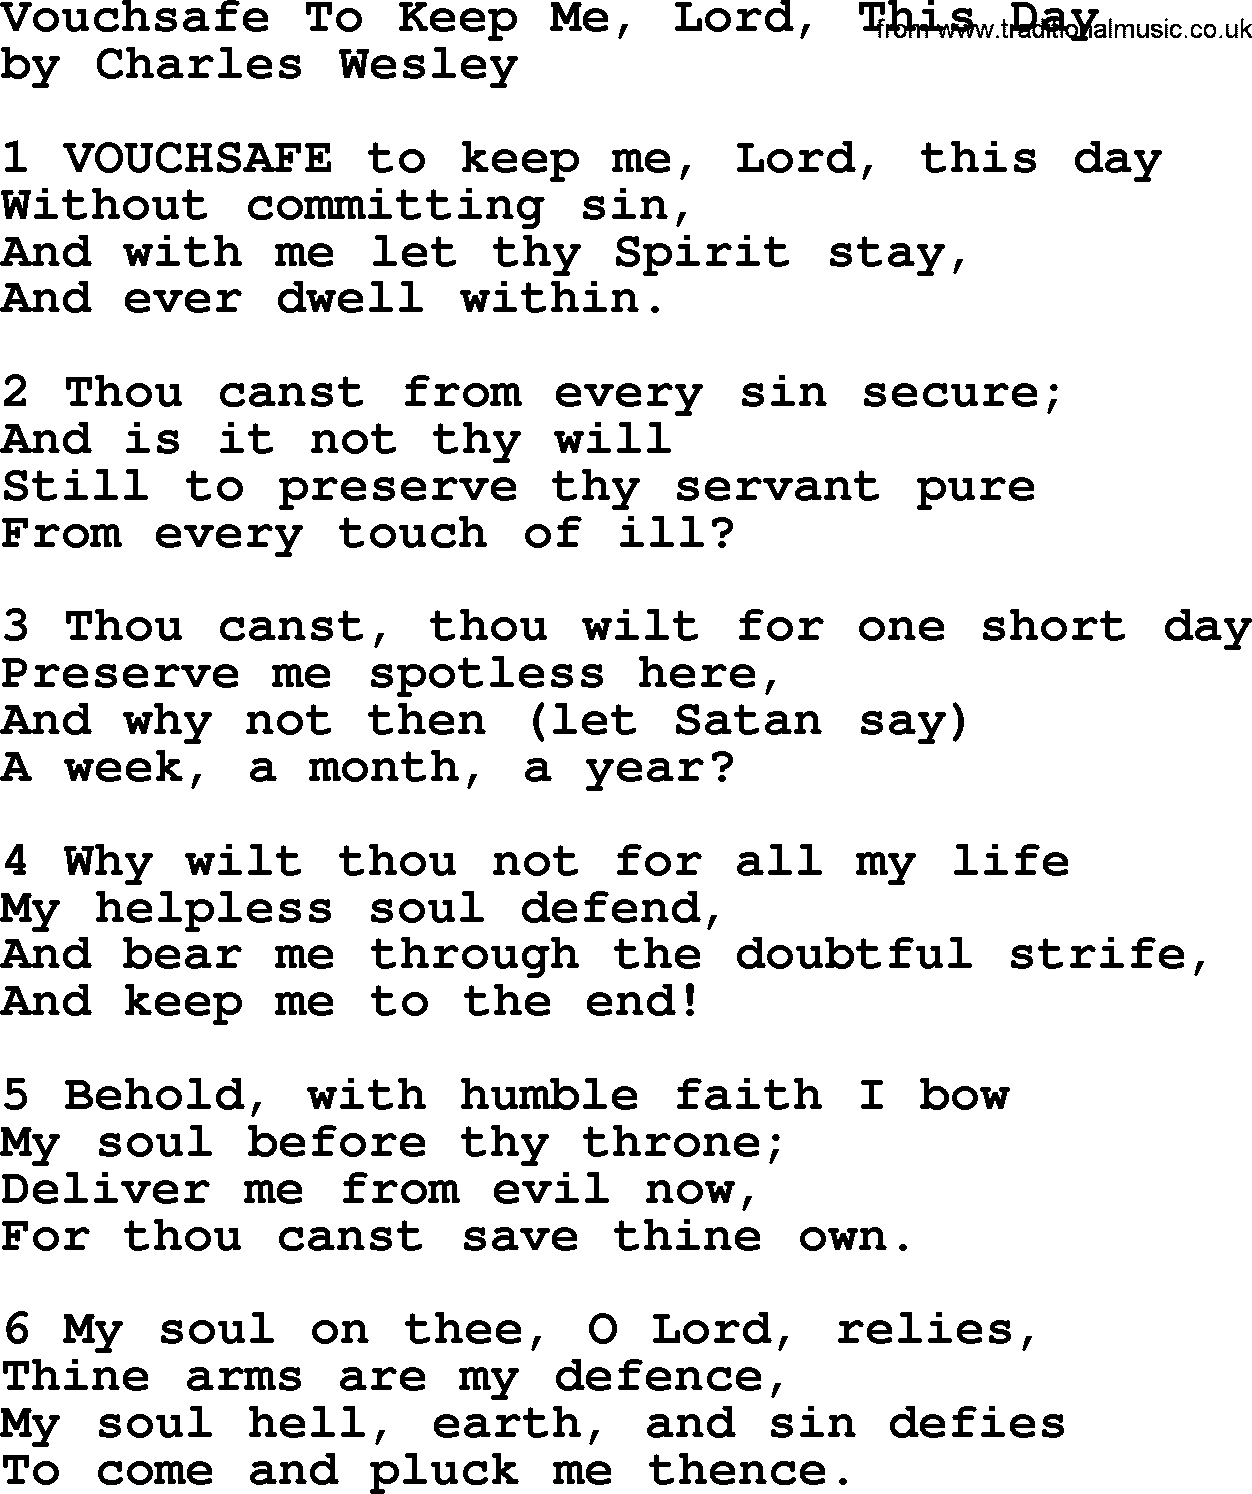 Charles Wesley hymn: Vouchsafe To Keep Me, Lord, This Day, lyrics